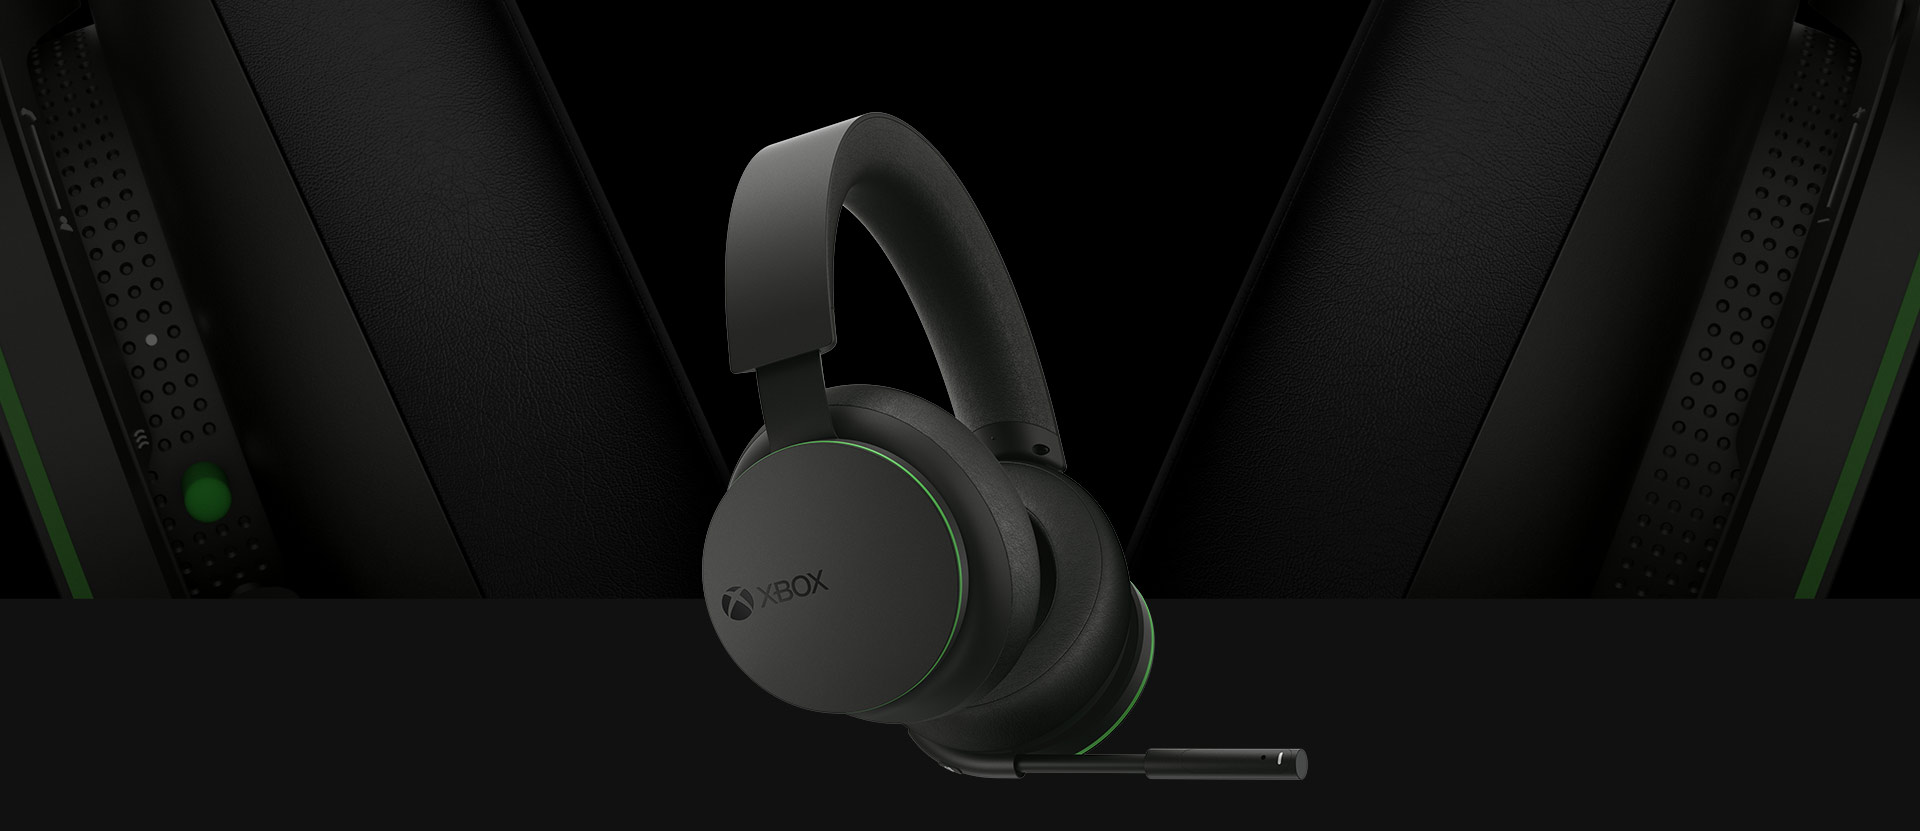 Front angled view of the Xbox Wireless Headset. A larger detailed view of the earcups is pictured behind the headset.